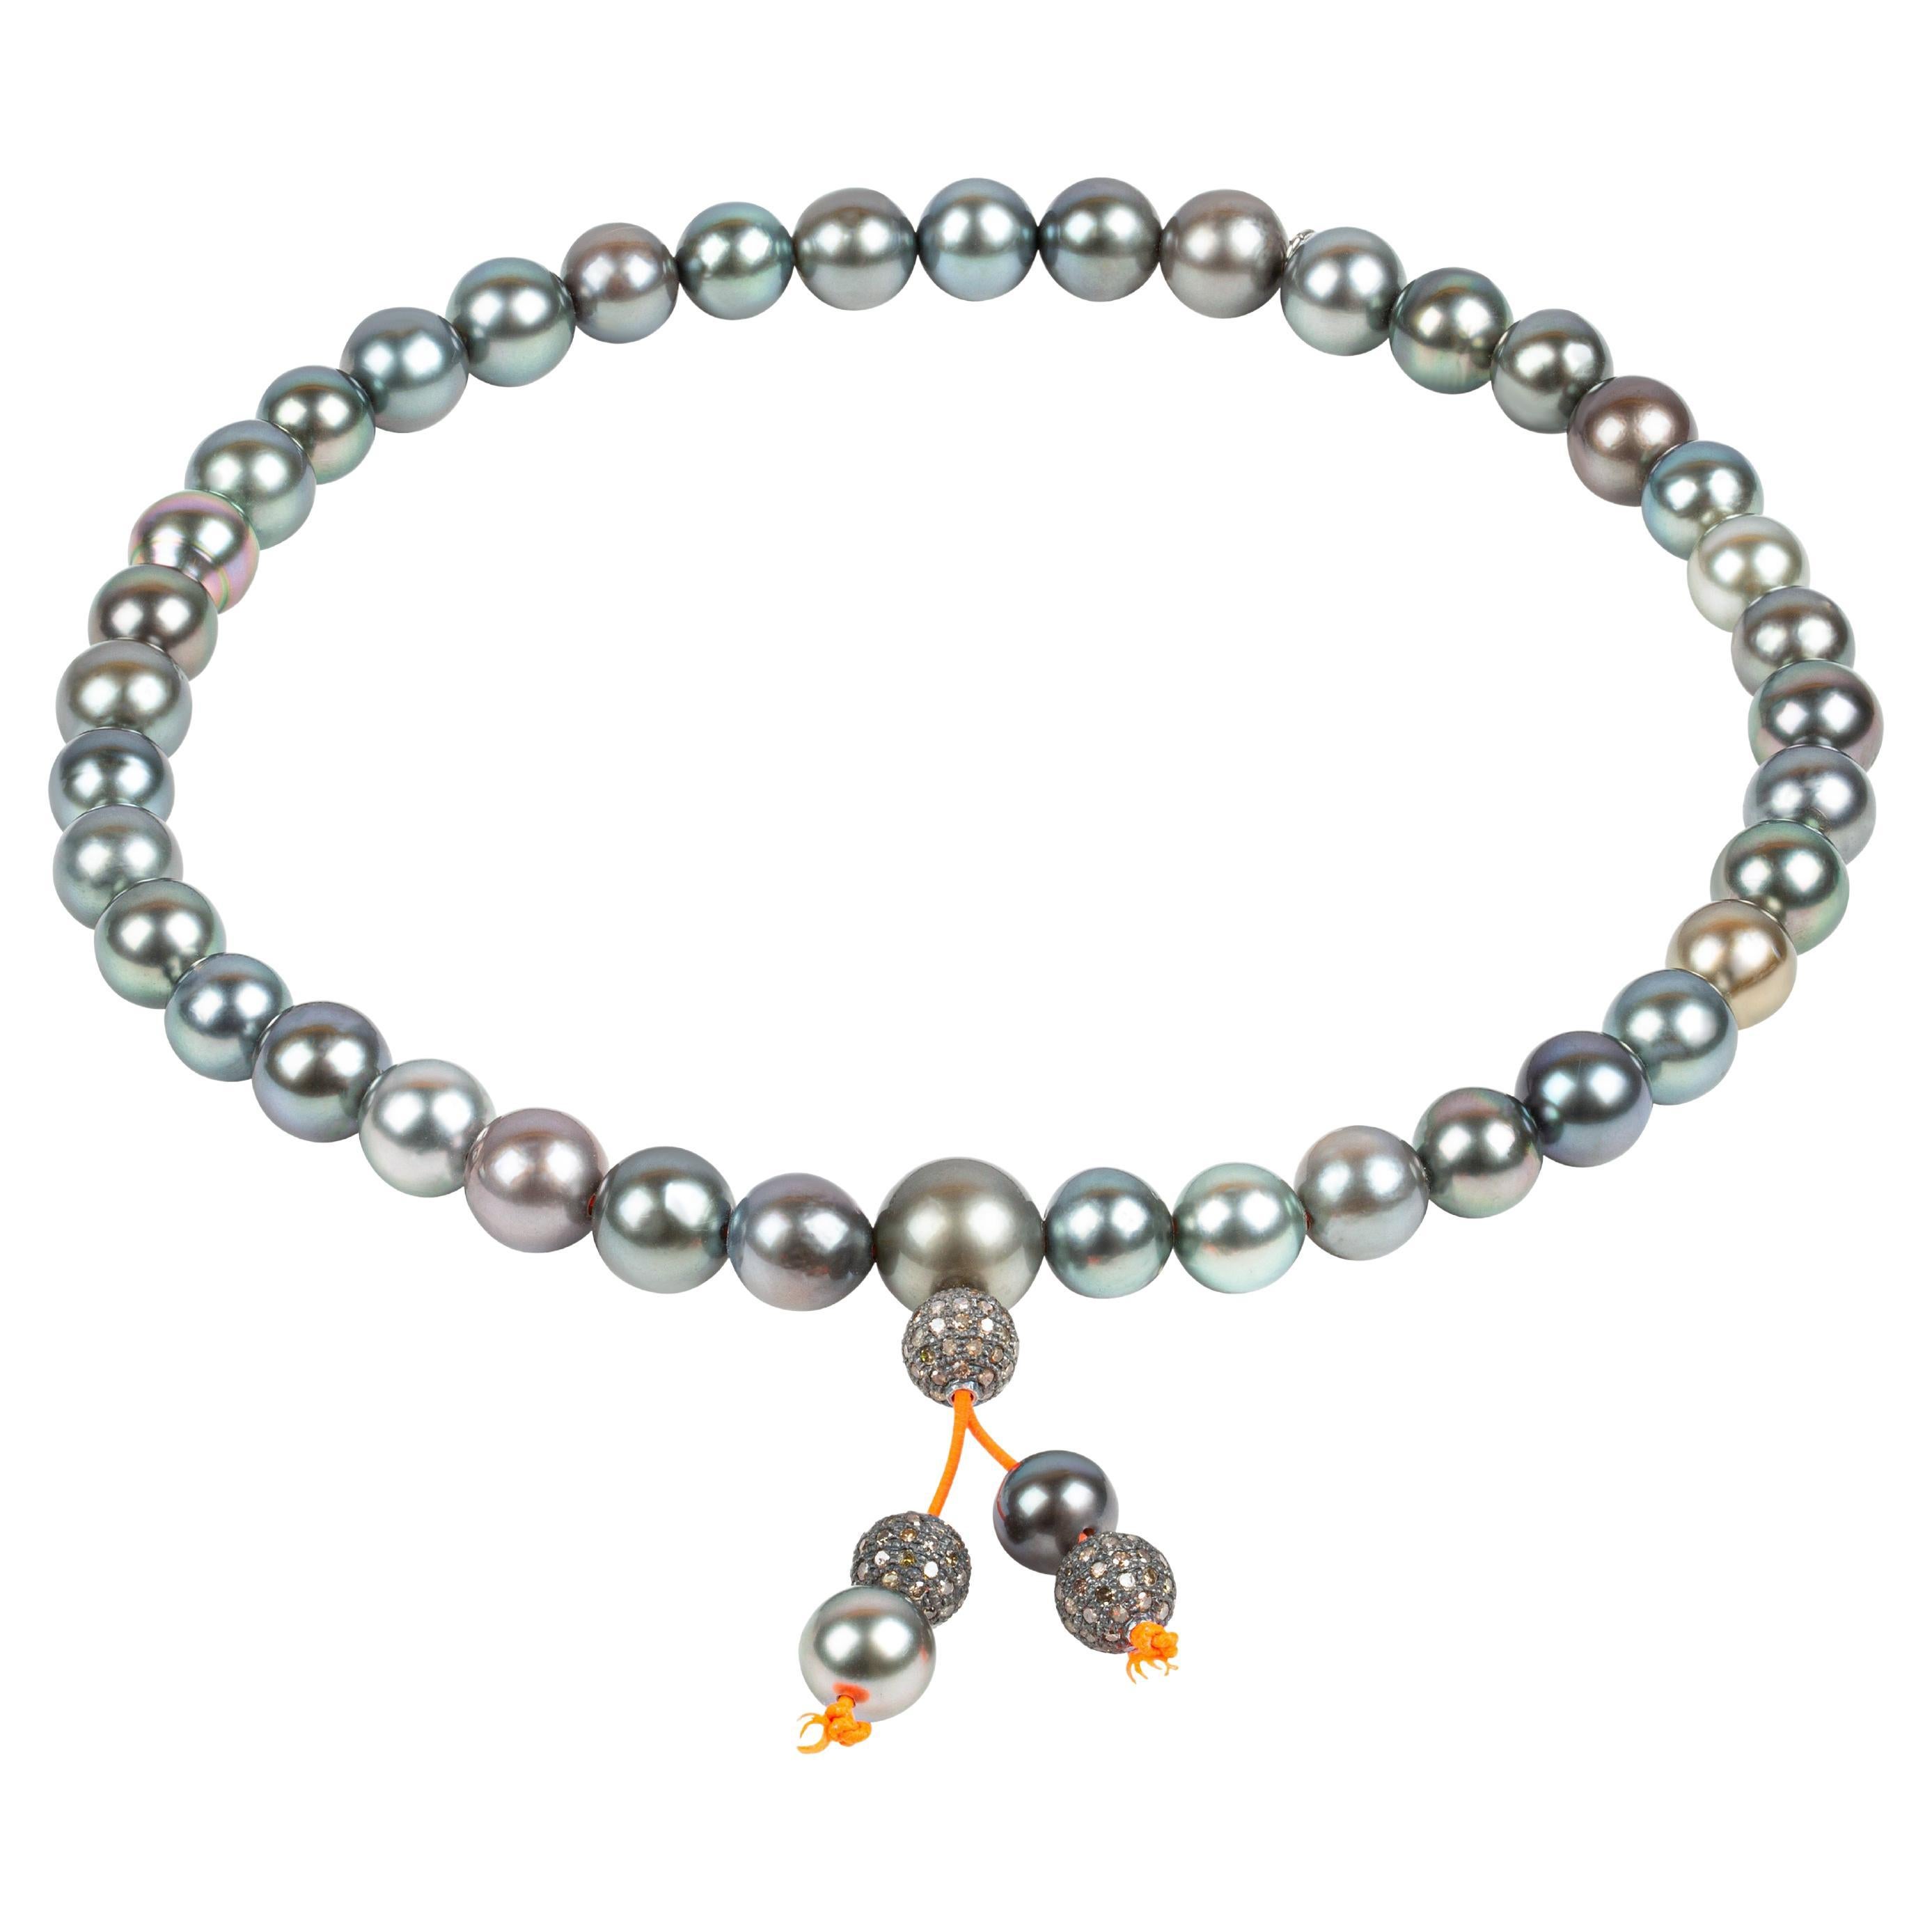 Prayer bracelet/necklace with Tahiti pearls and silver encrusted diamond beads For Sale